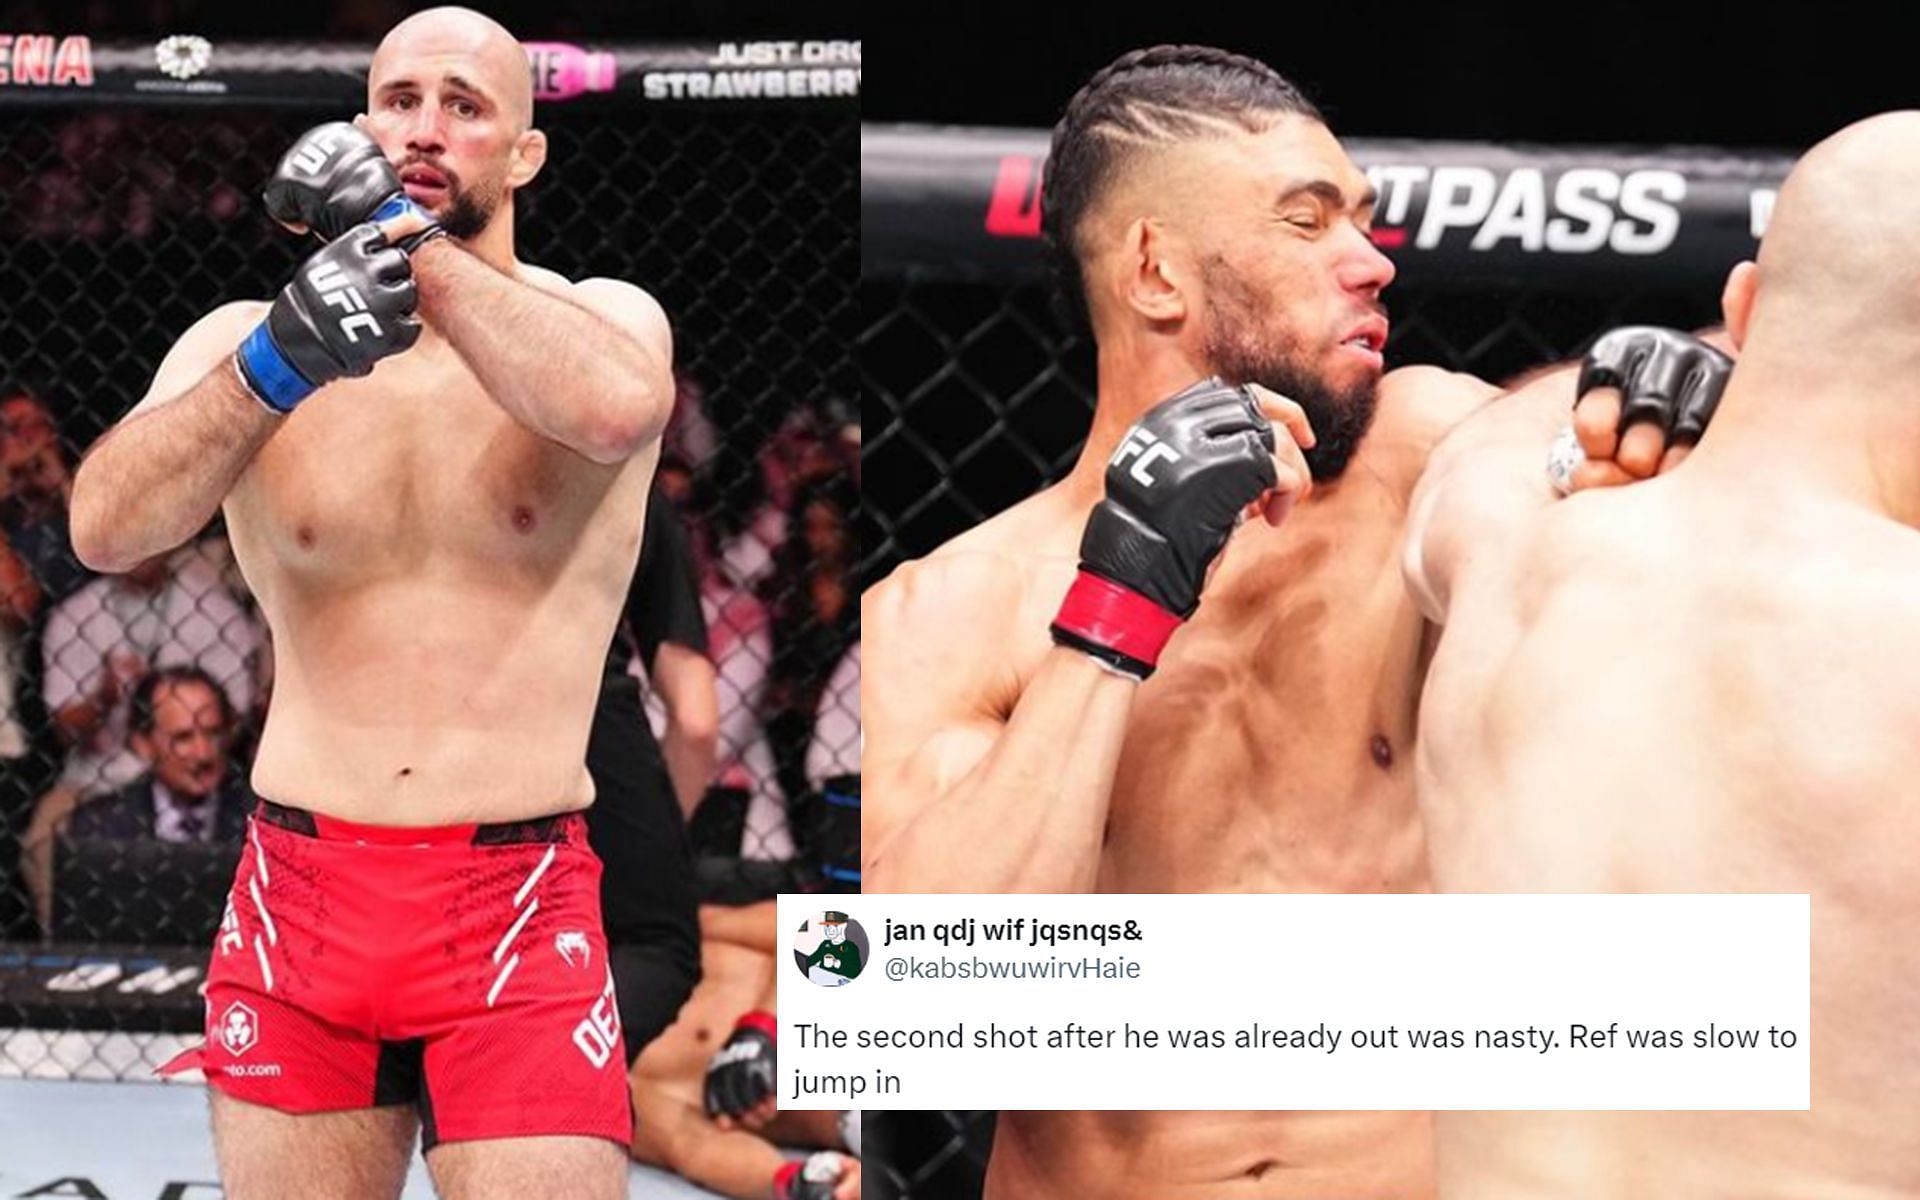 Volkan Oezdemir (left) knocked out Johnny Walker (right) at UFC Saudi Arabia [Images courtesy: @ufceurope and @ufceurasia on Instagram]